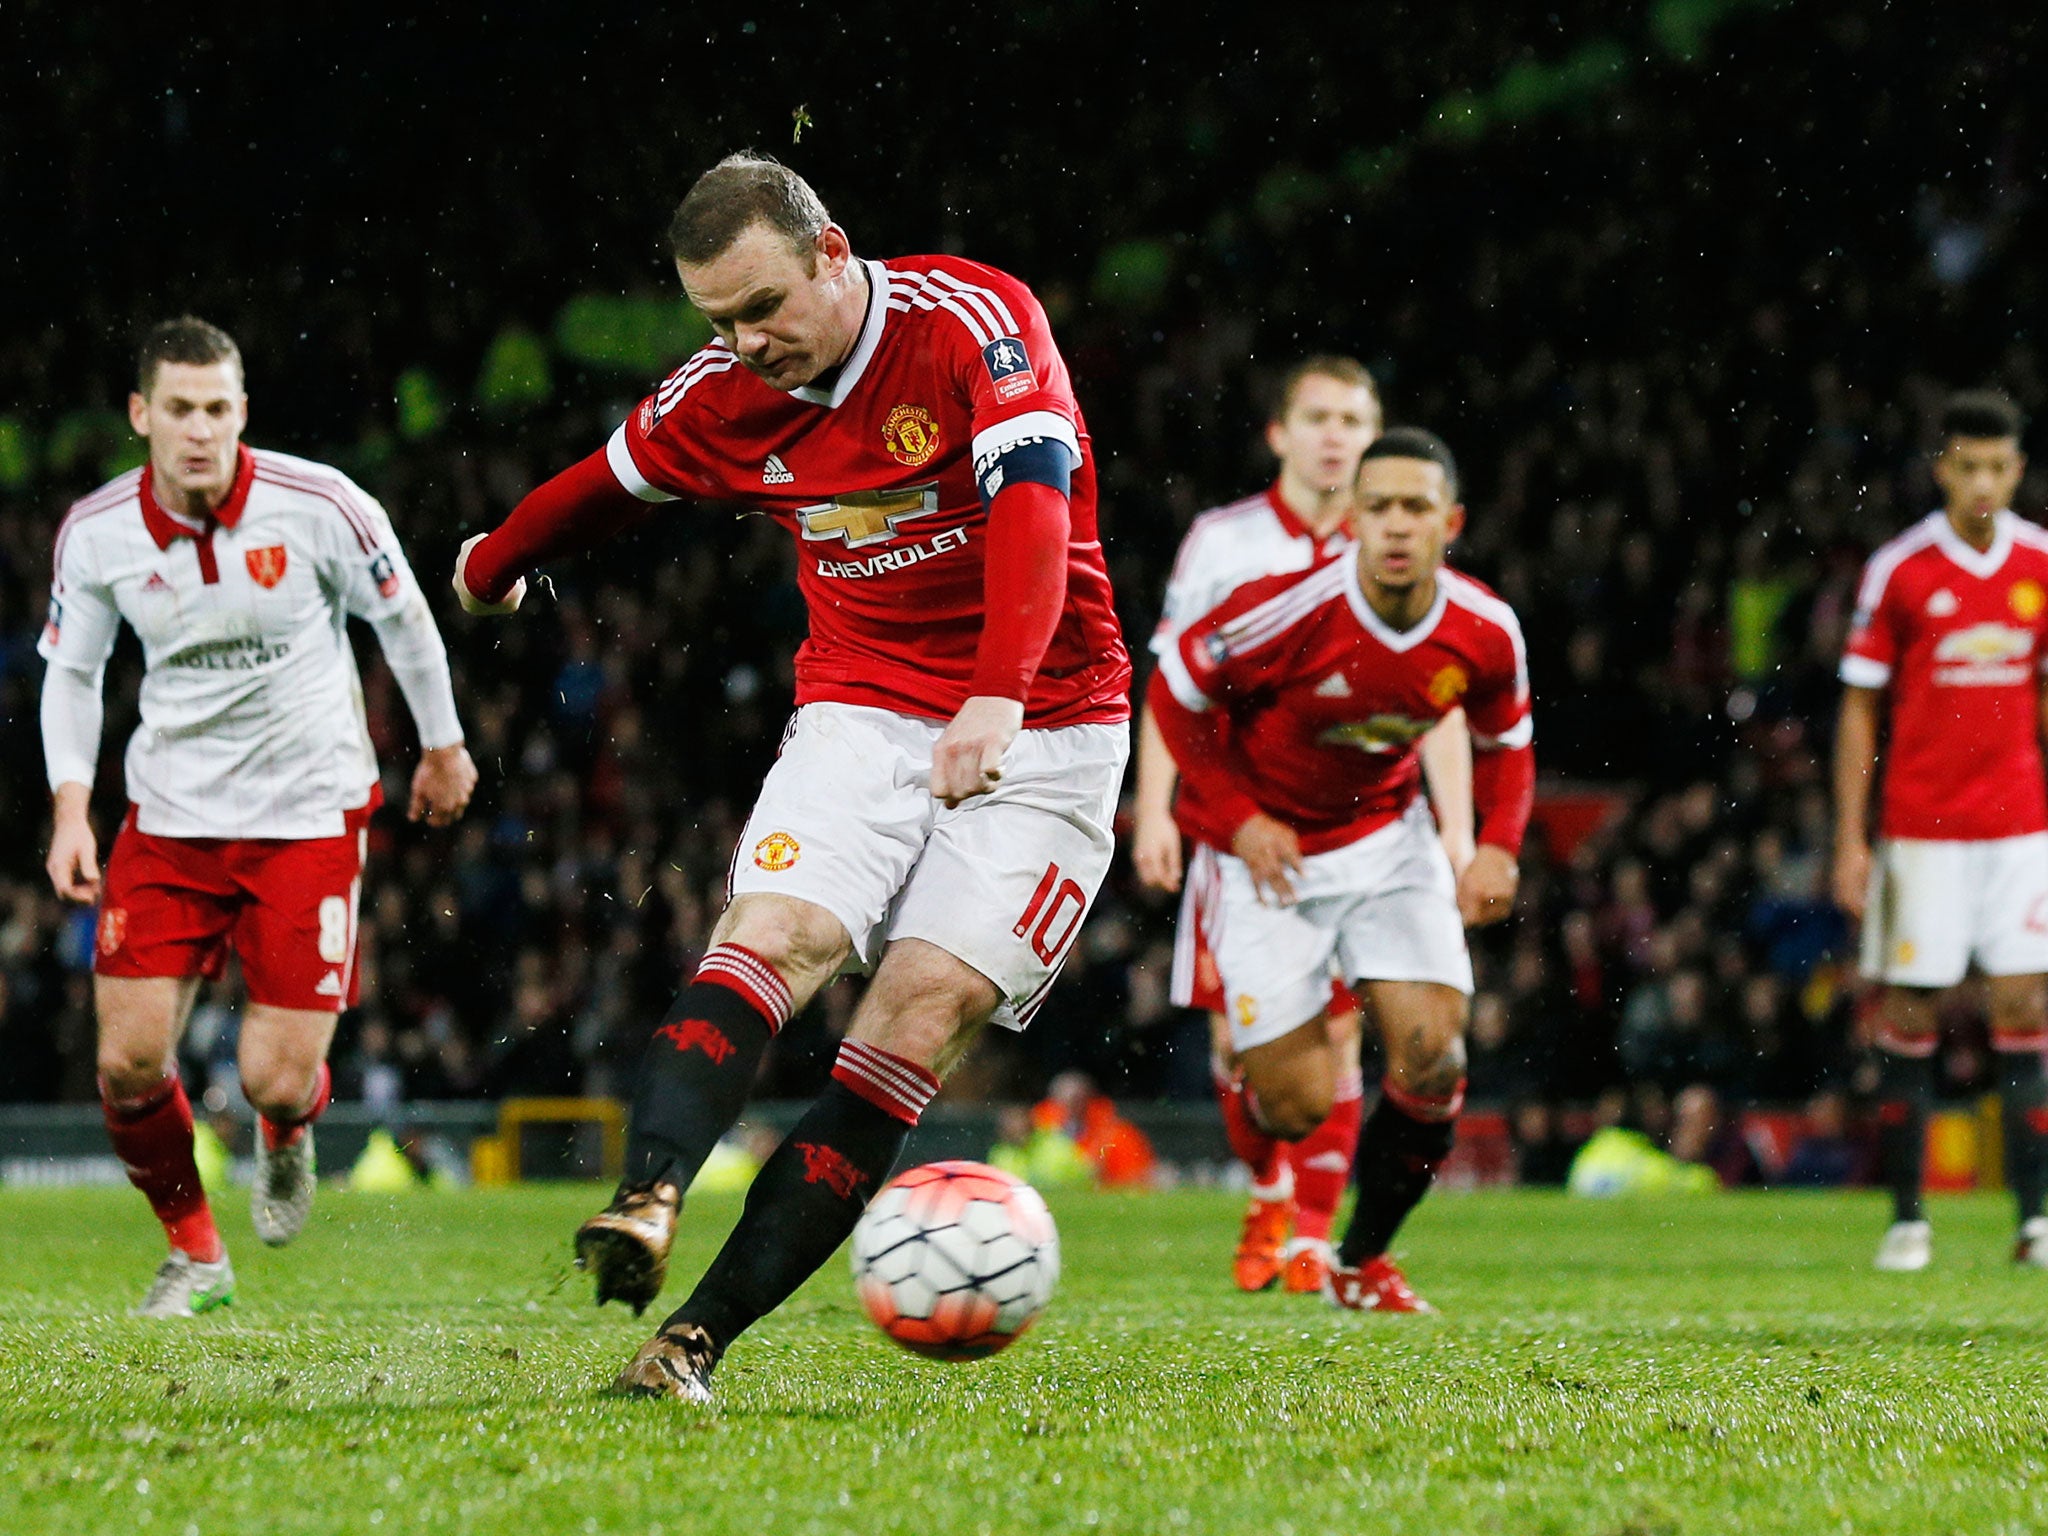 Wayne Rooney scores from the spot to earn Manchester United a late winner against Sheffield United